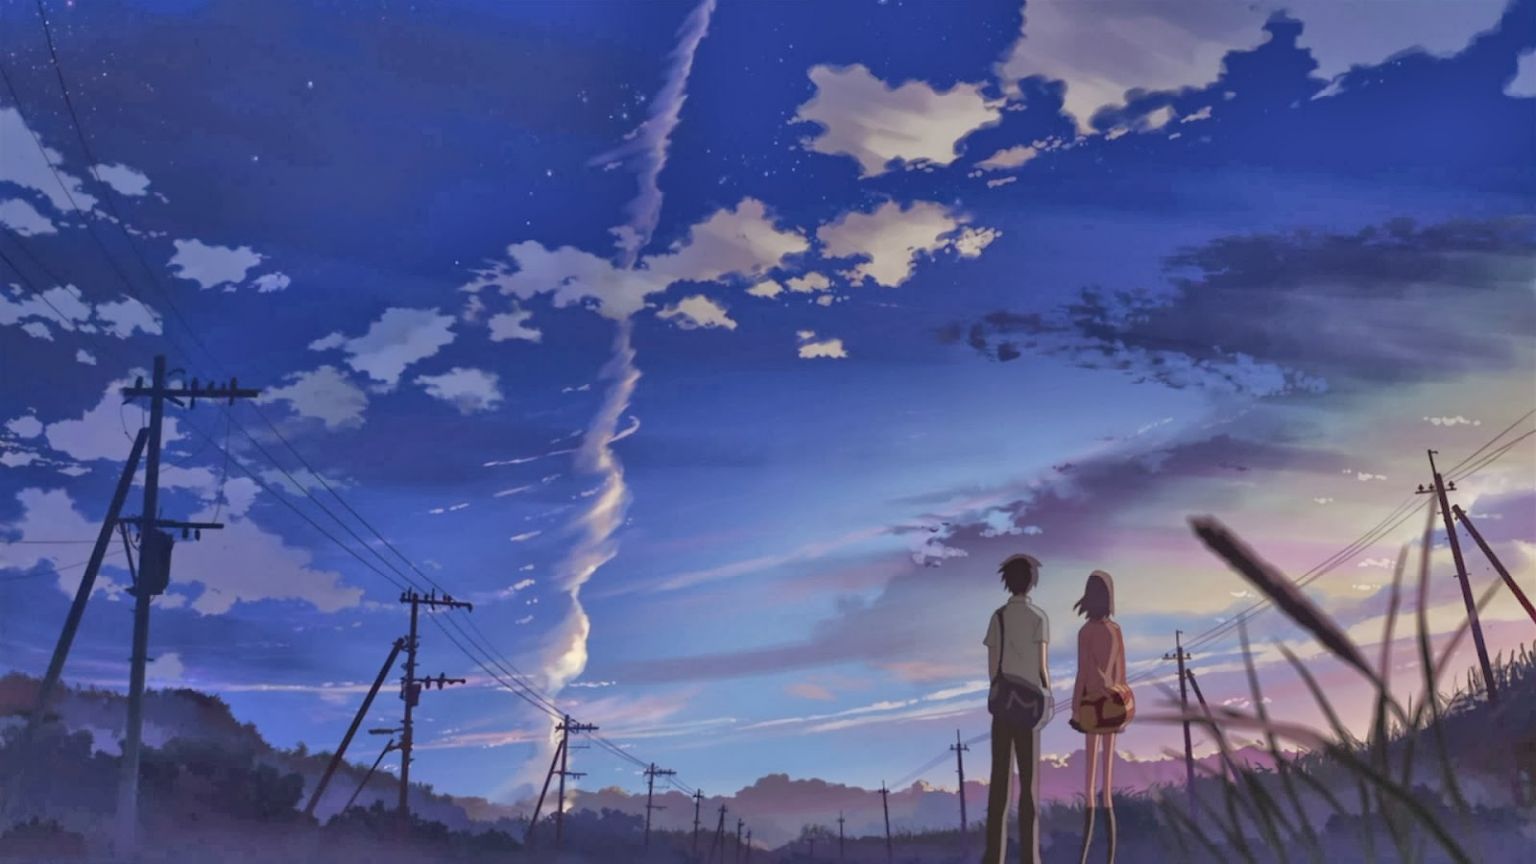 Free download FREE HD WALLPAPER DOWNLOAD 5 Centimeters Per Second